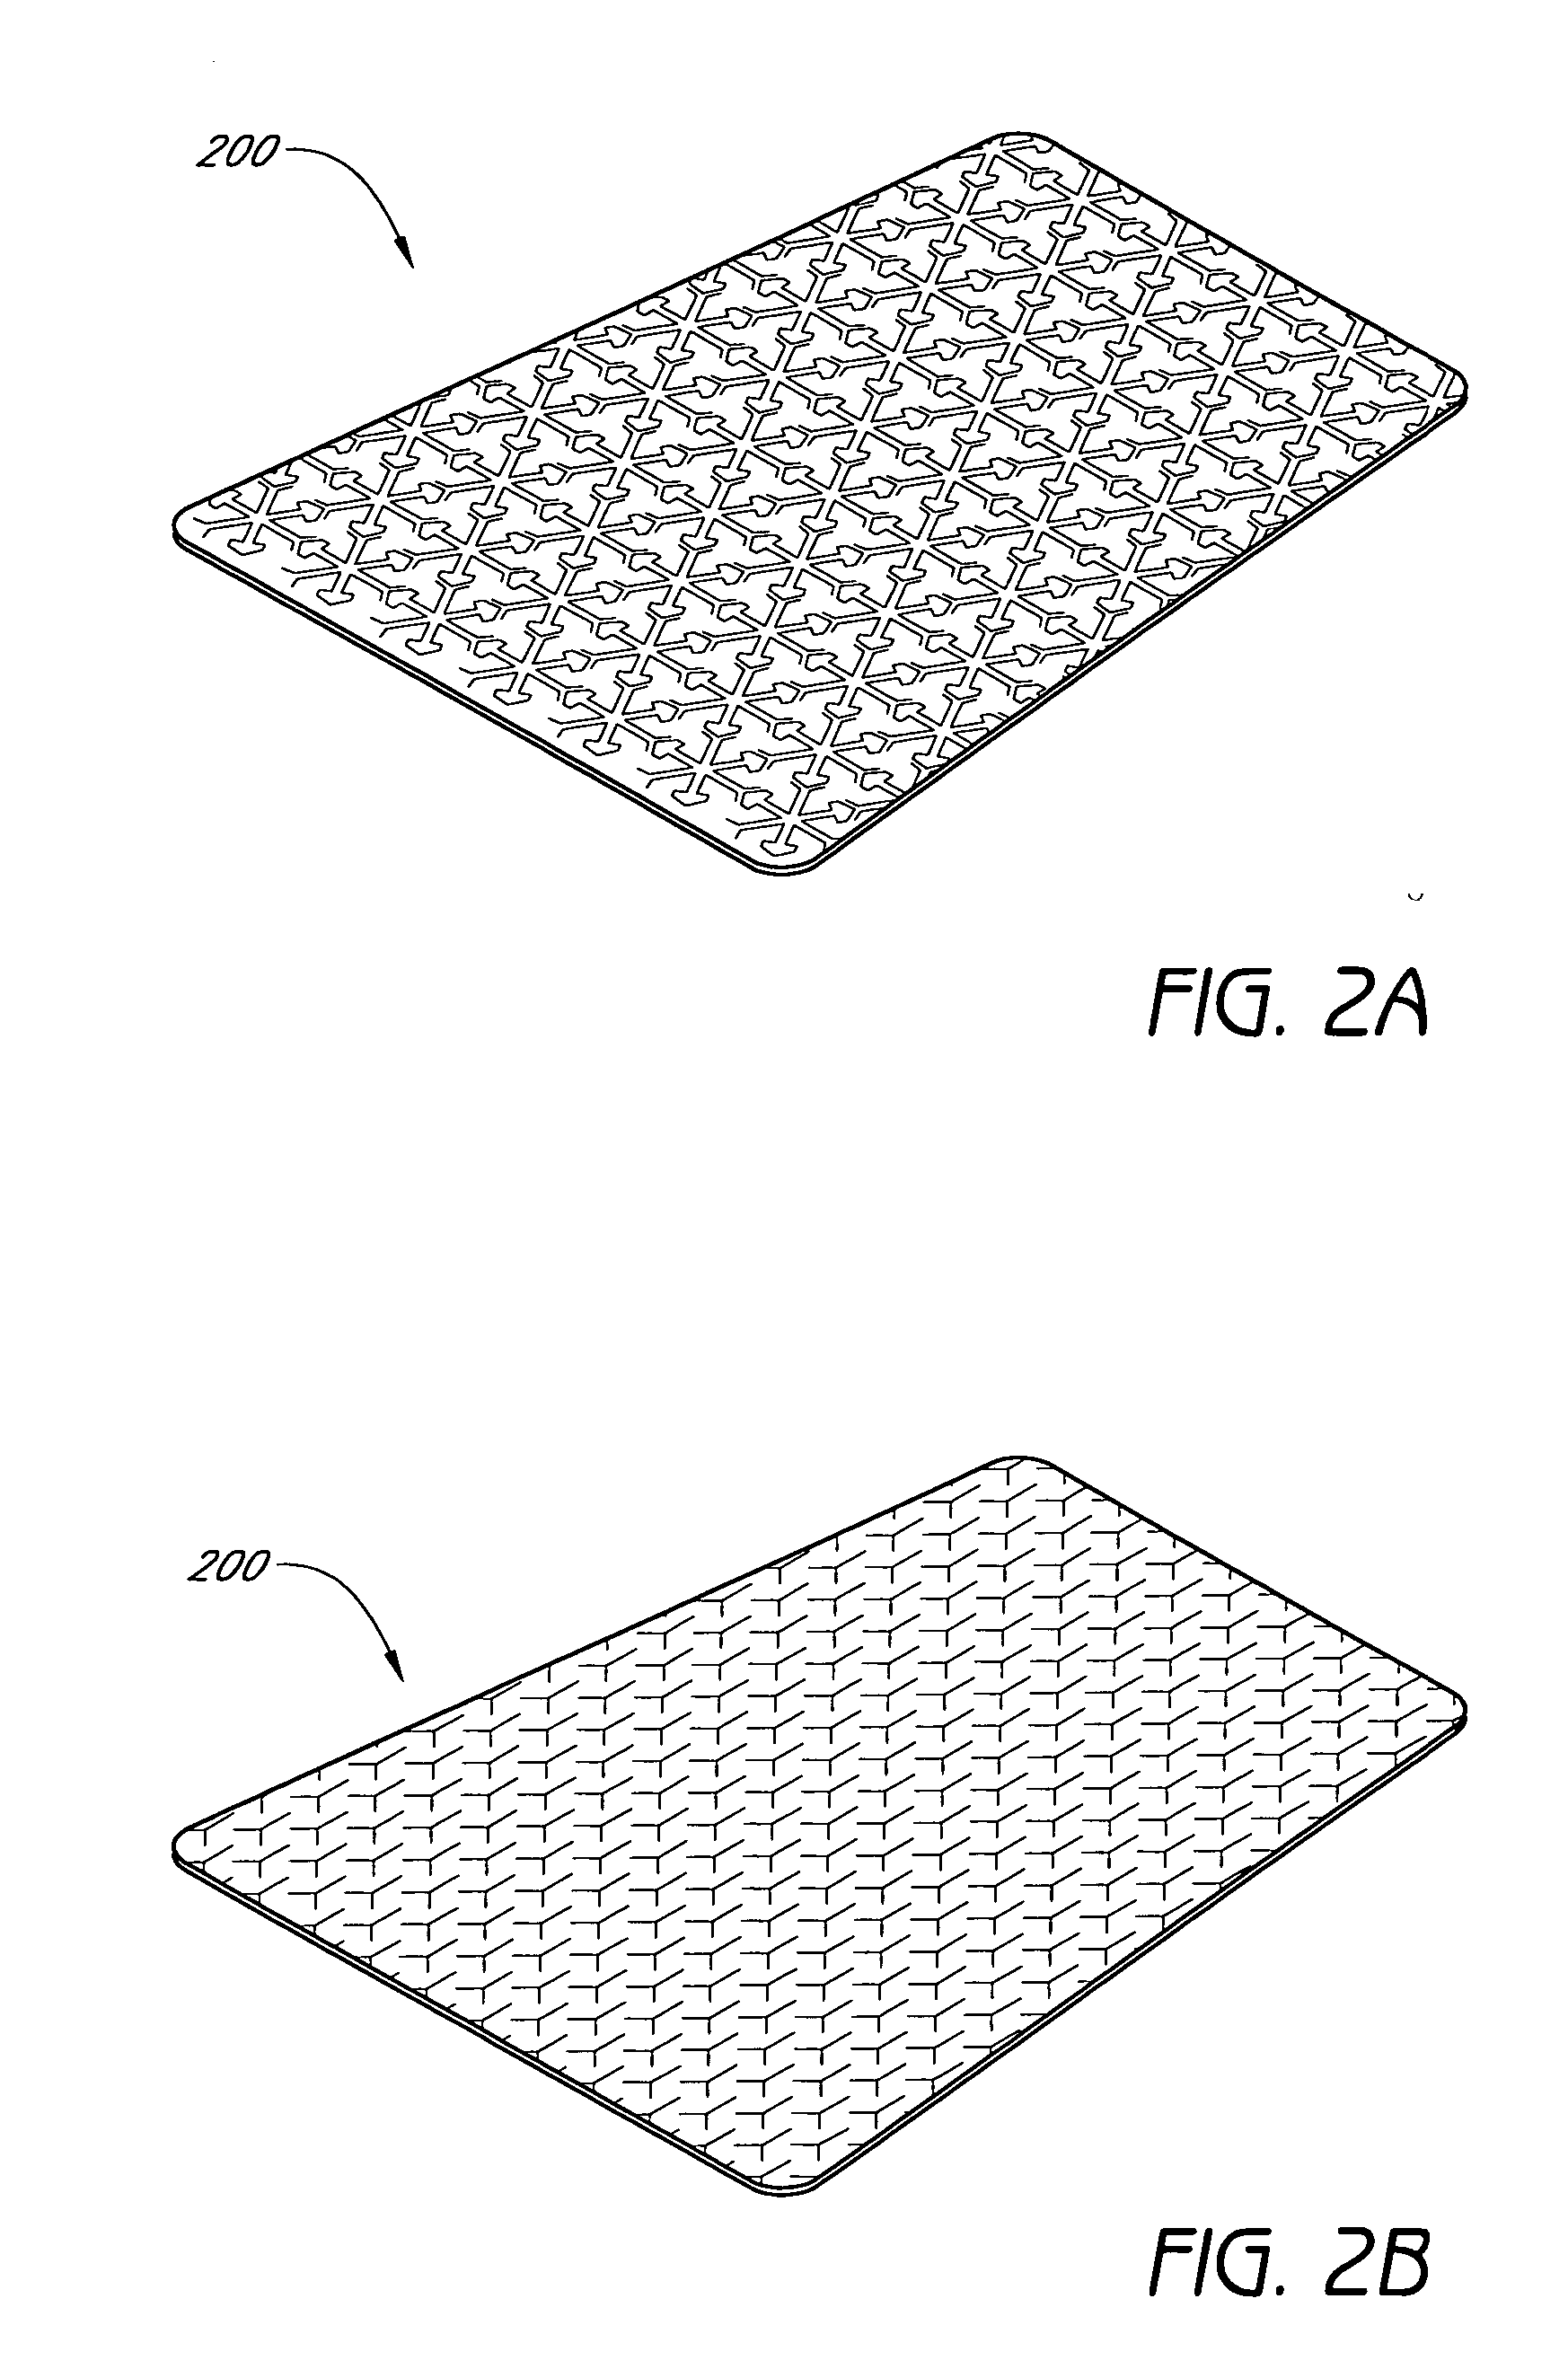 Thermoformed frequency selective surface